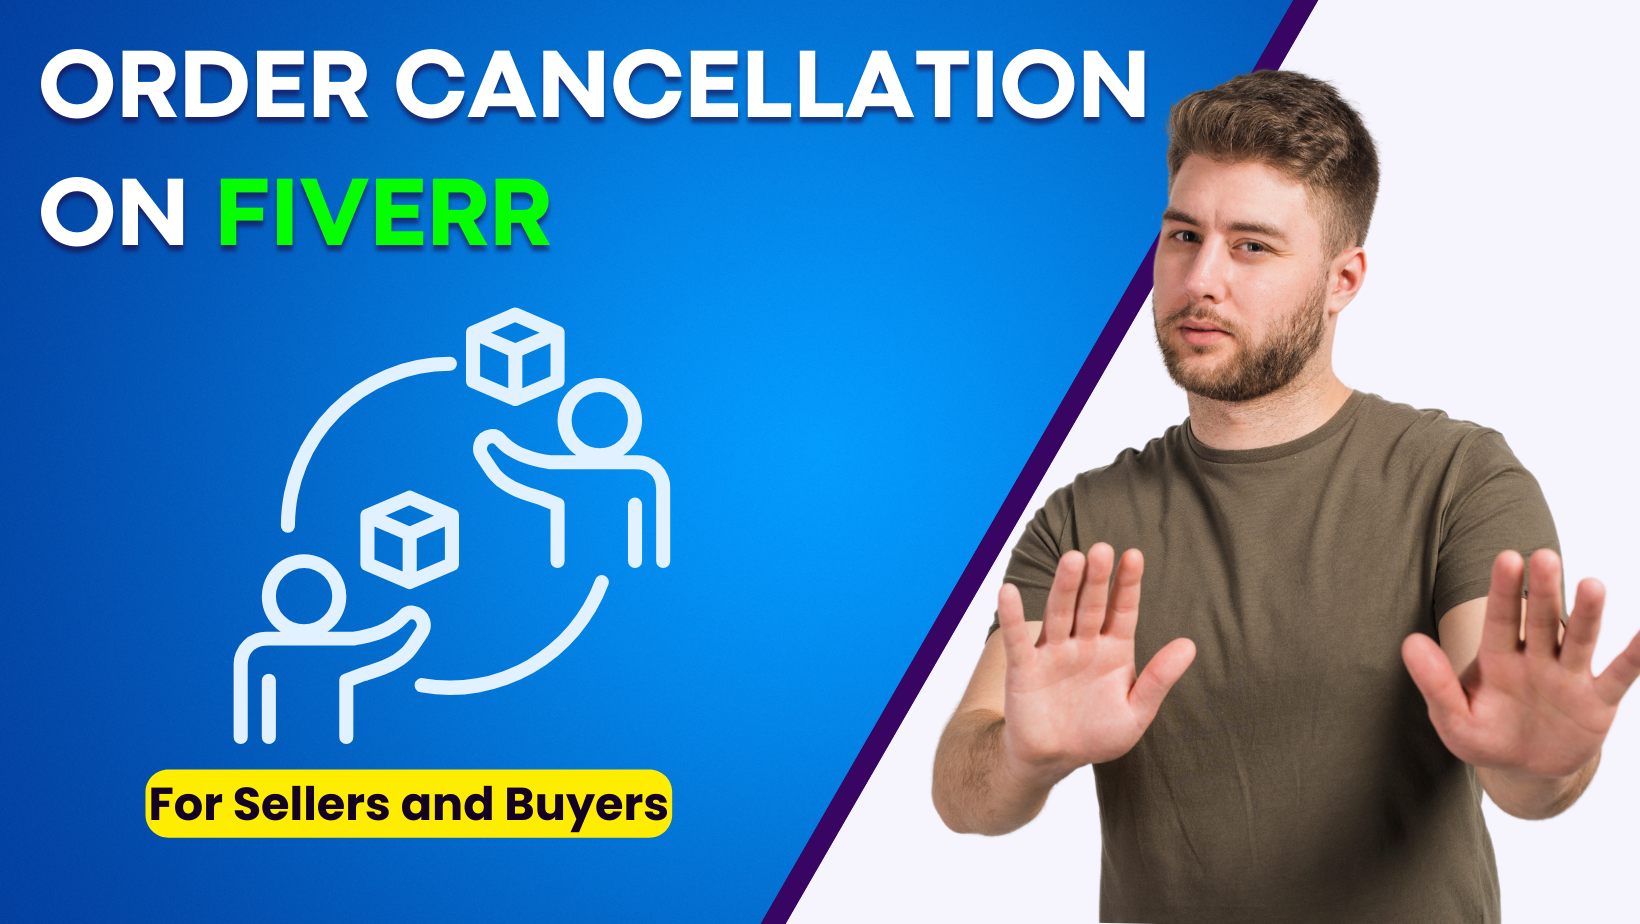 How to cancel the Order on Fiverr?